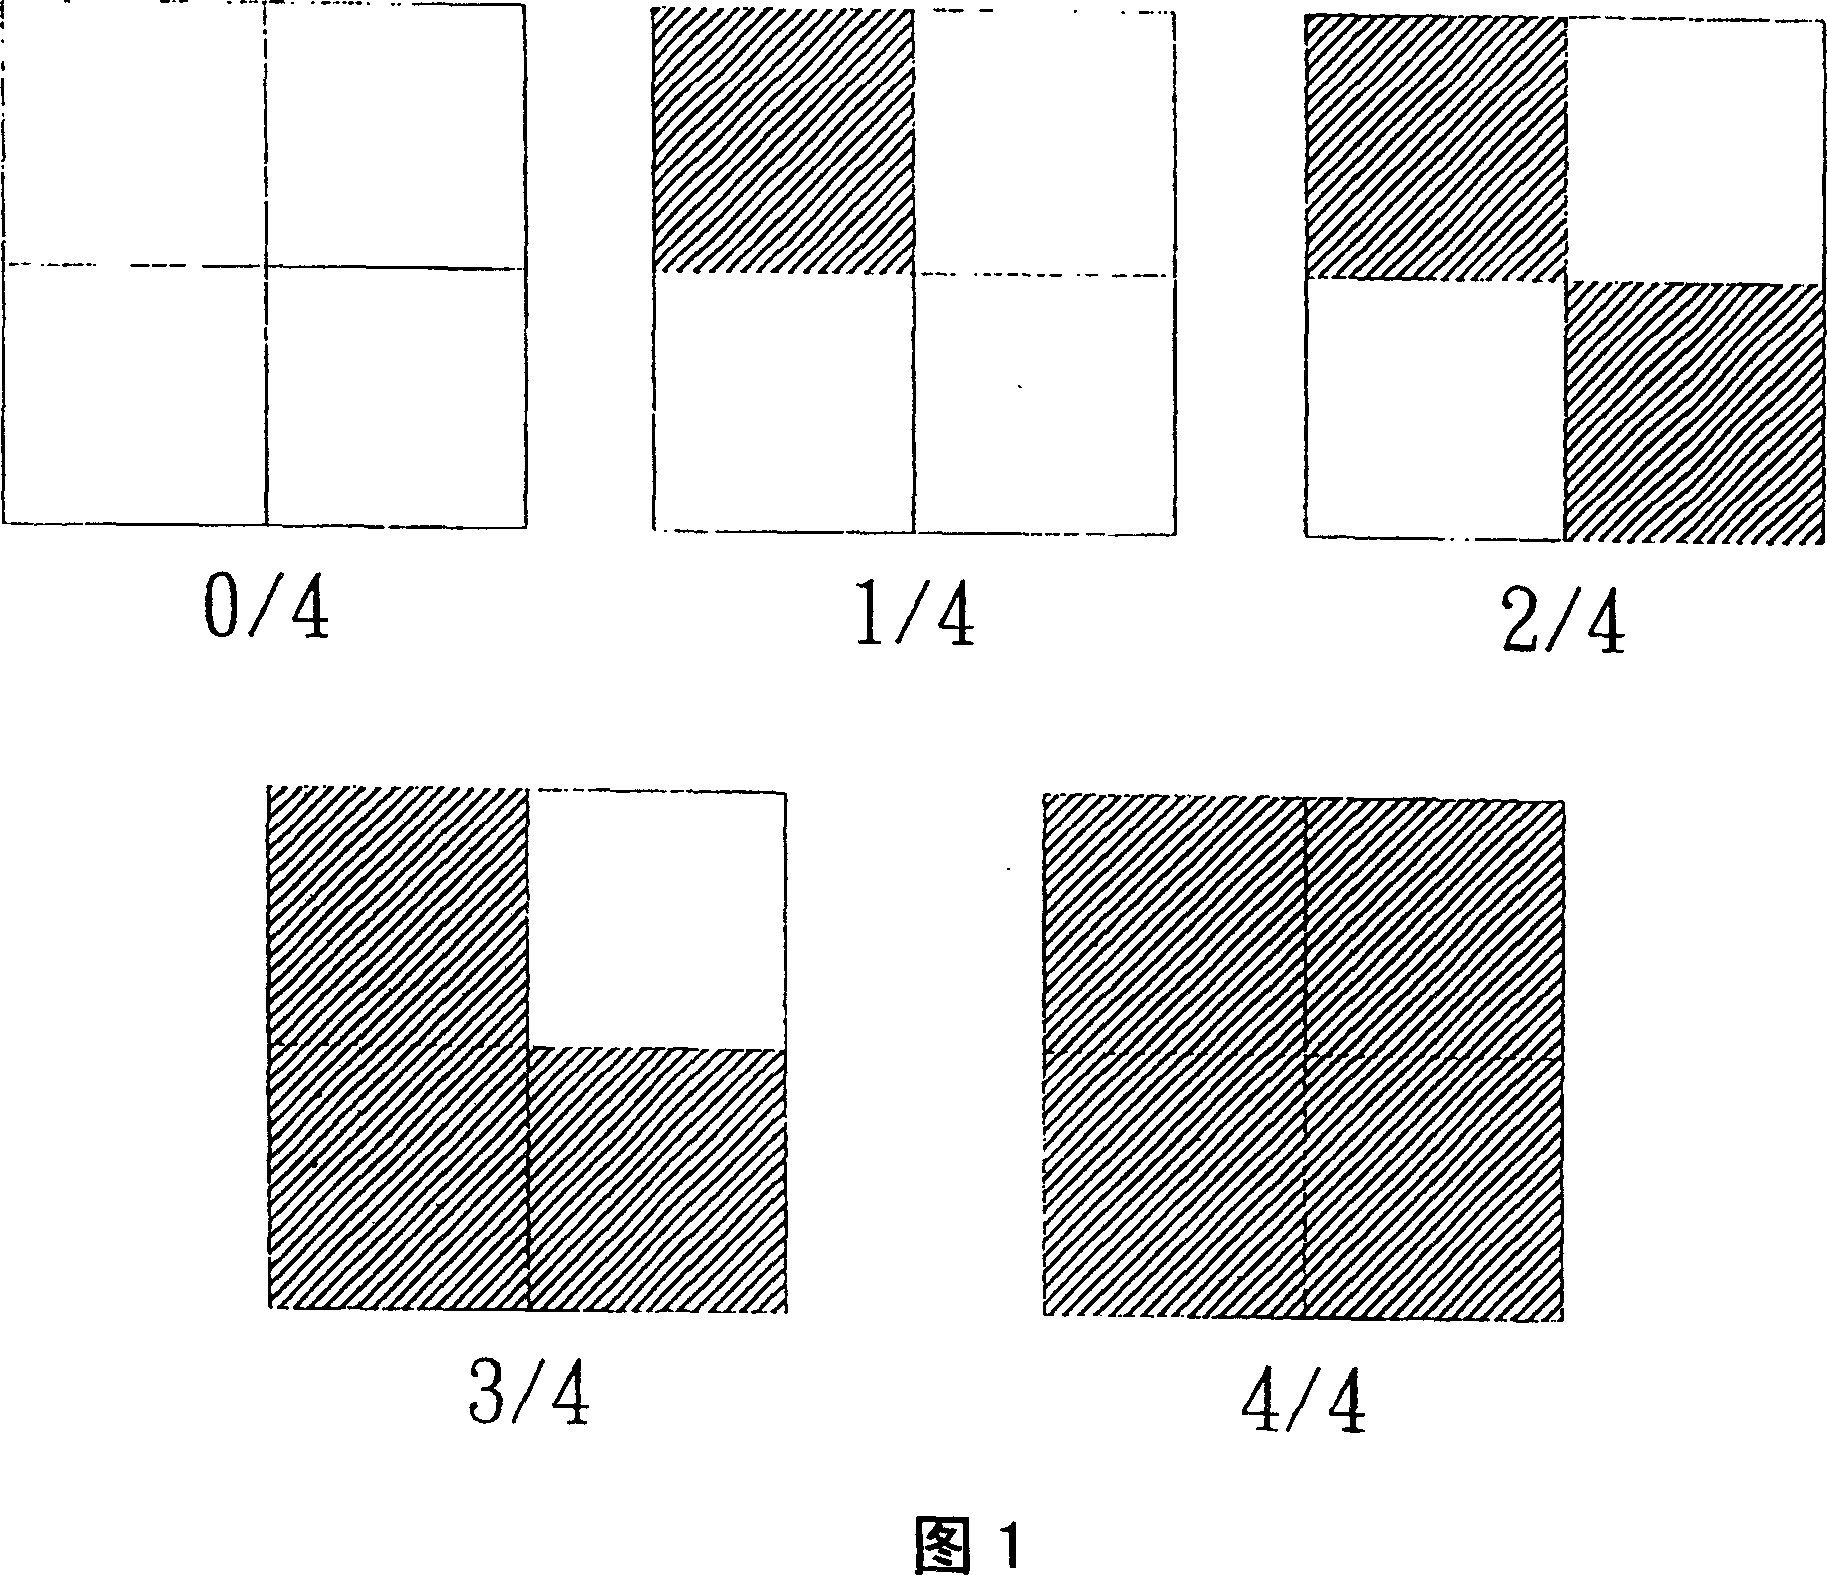 Table-printing machine system and method with halftone monocoloure treatment